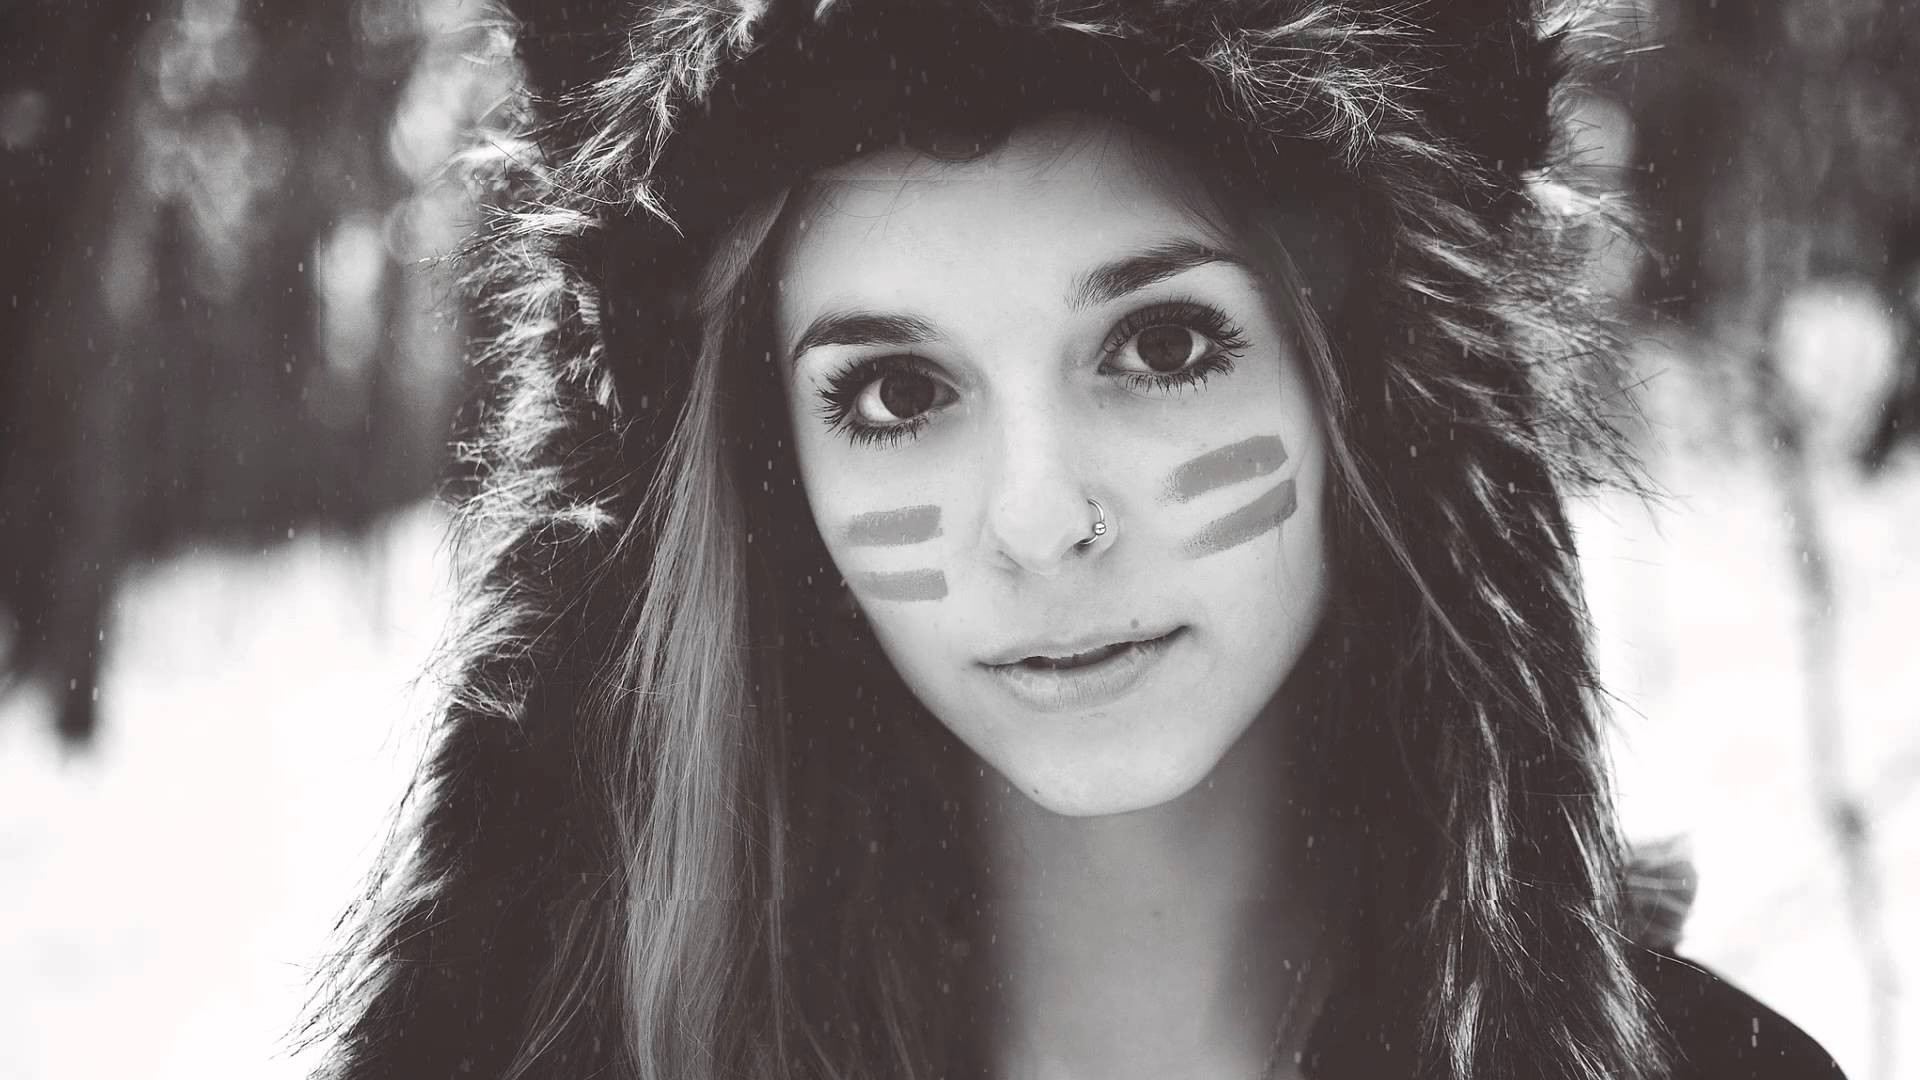 People 1920x1080 women winter face paint fluffy hat Fennek Suicide monochrome women outdoors snow looking at viewer face nose ring Suicide Girls cropped model